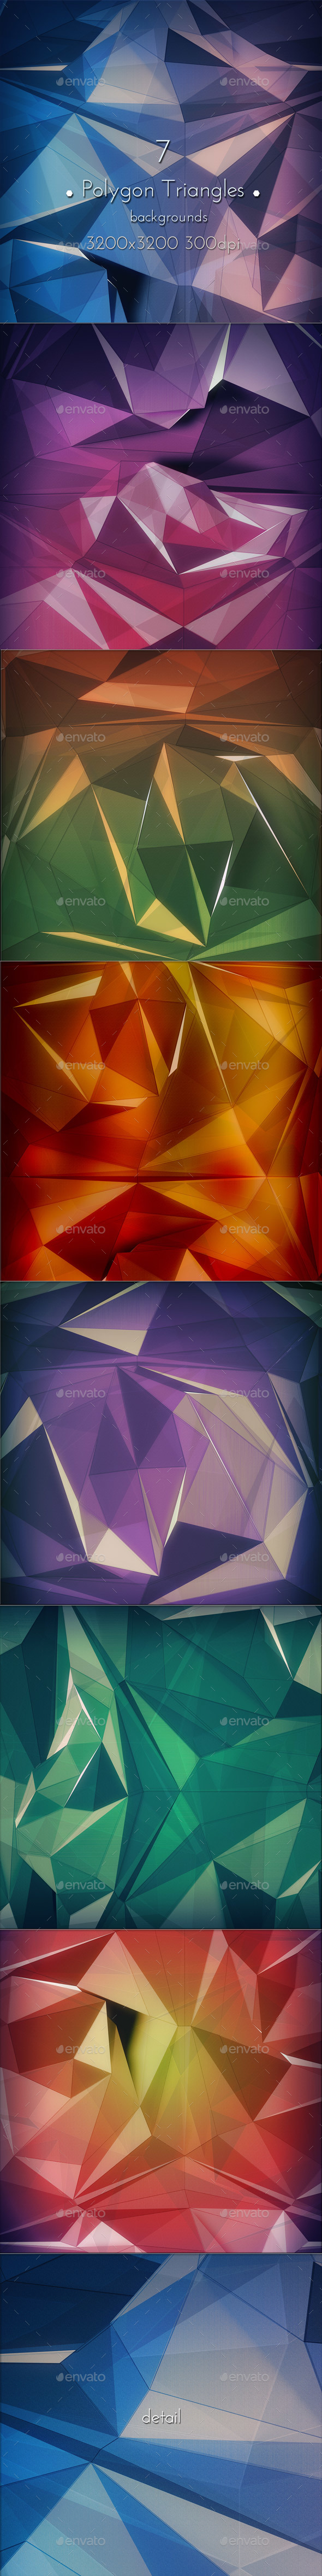 Polygon Triangles Background